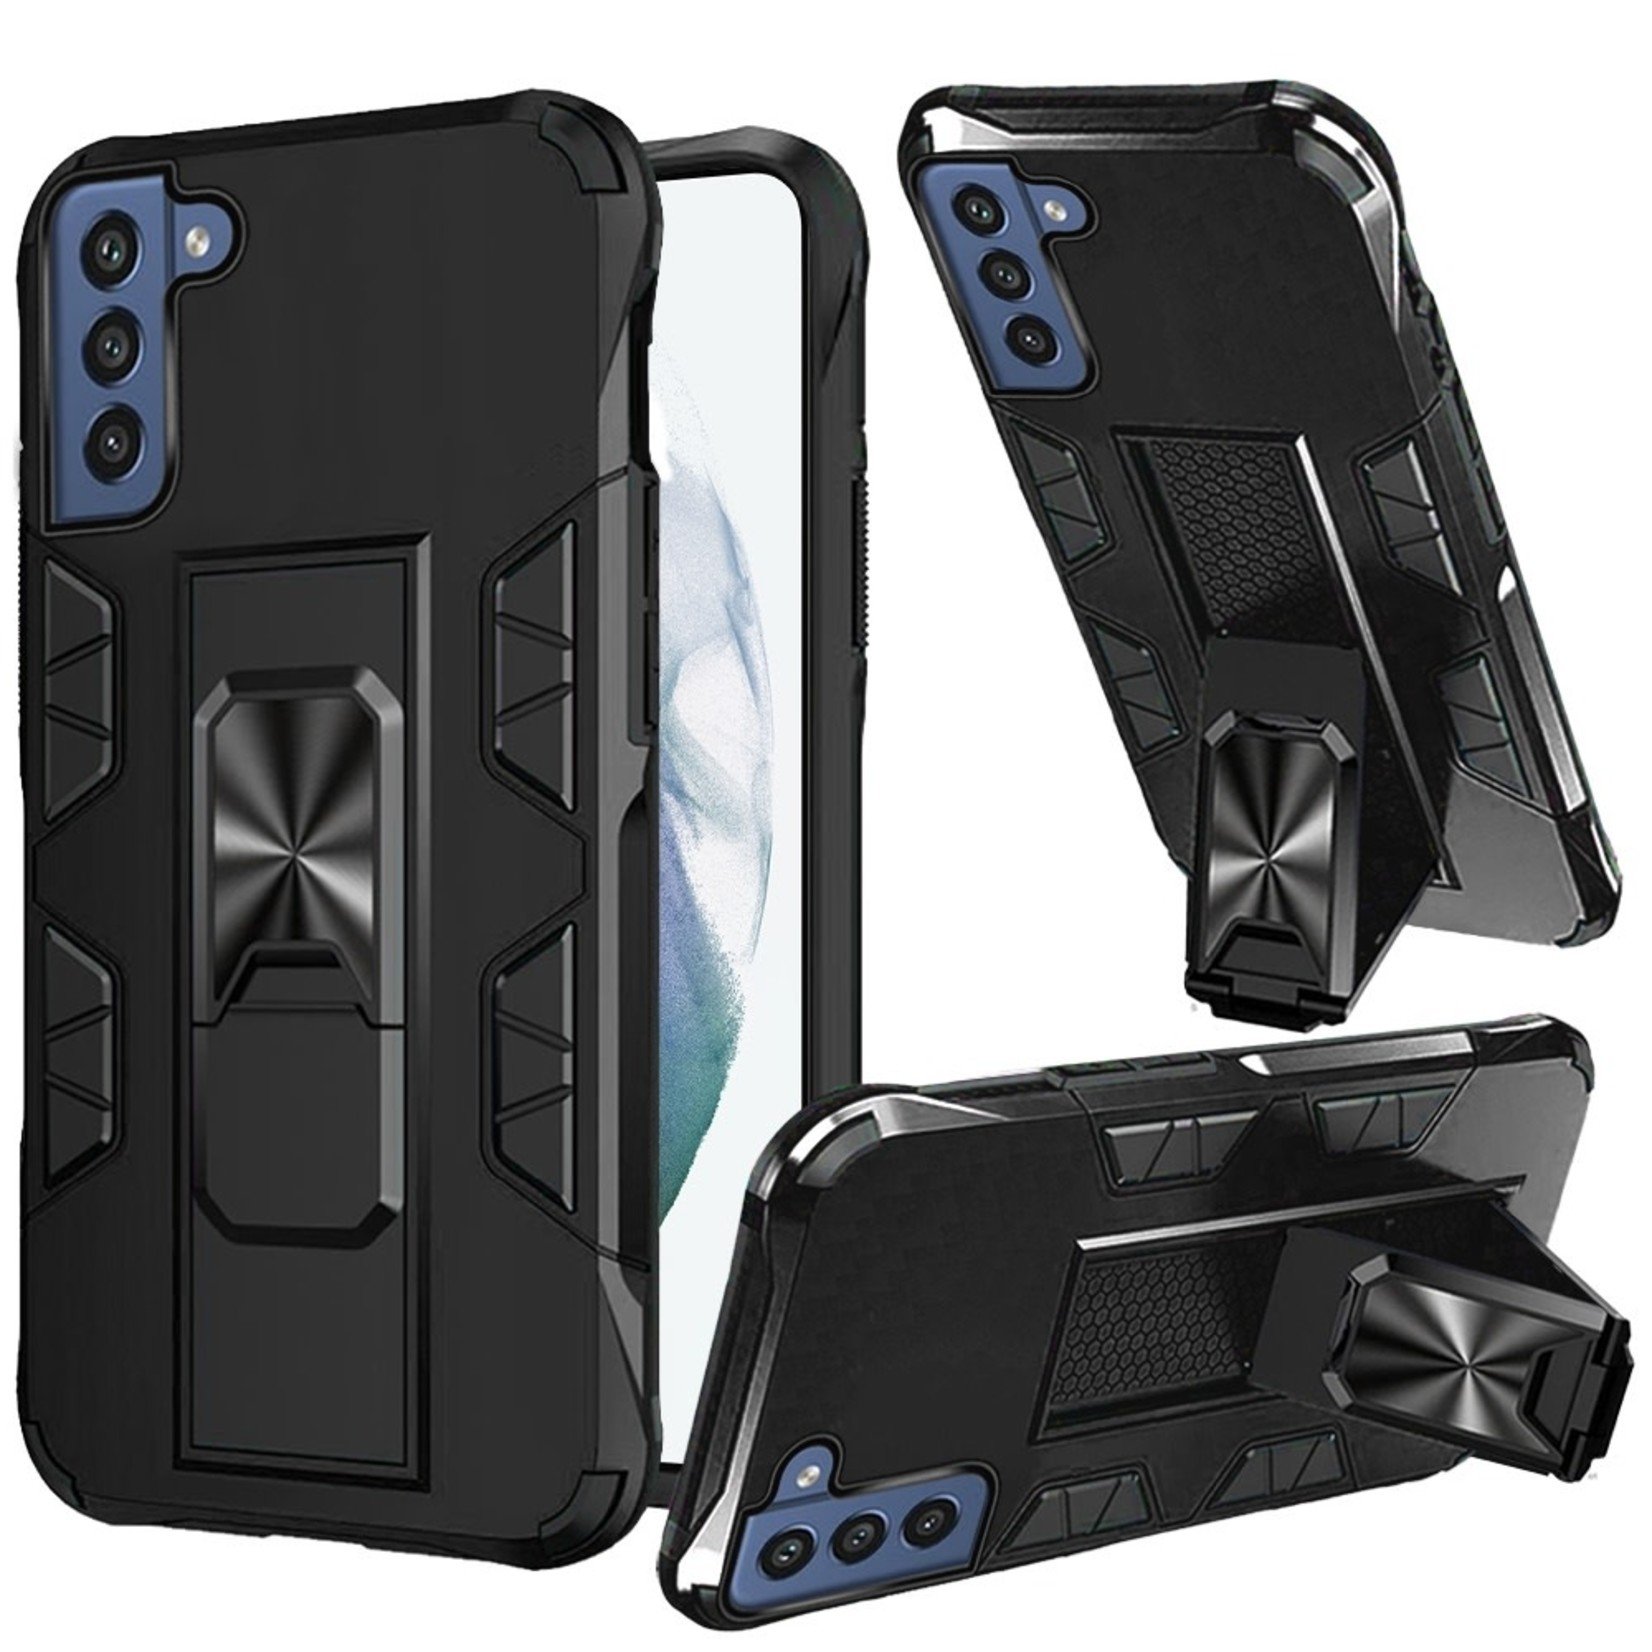 Samsung Optimum Magnetic RingStand Case Cover - Black For Samsung Galaxy S22